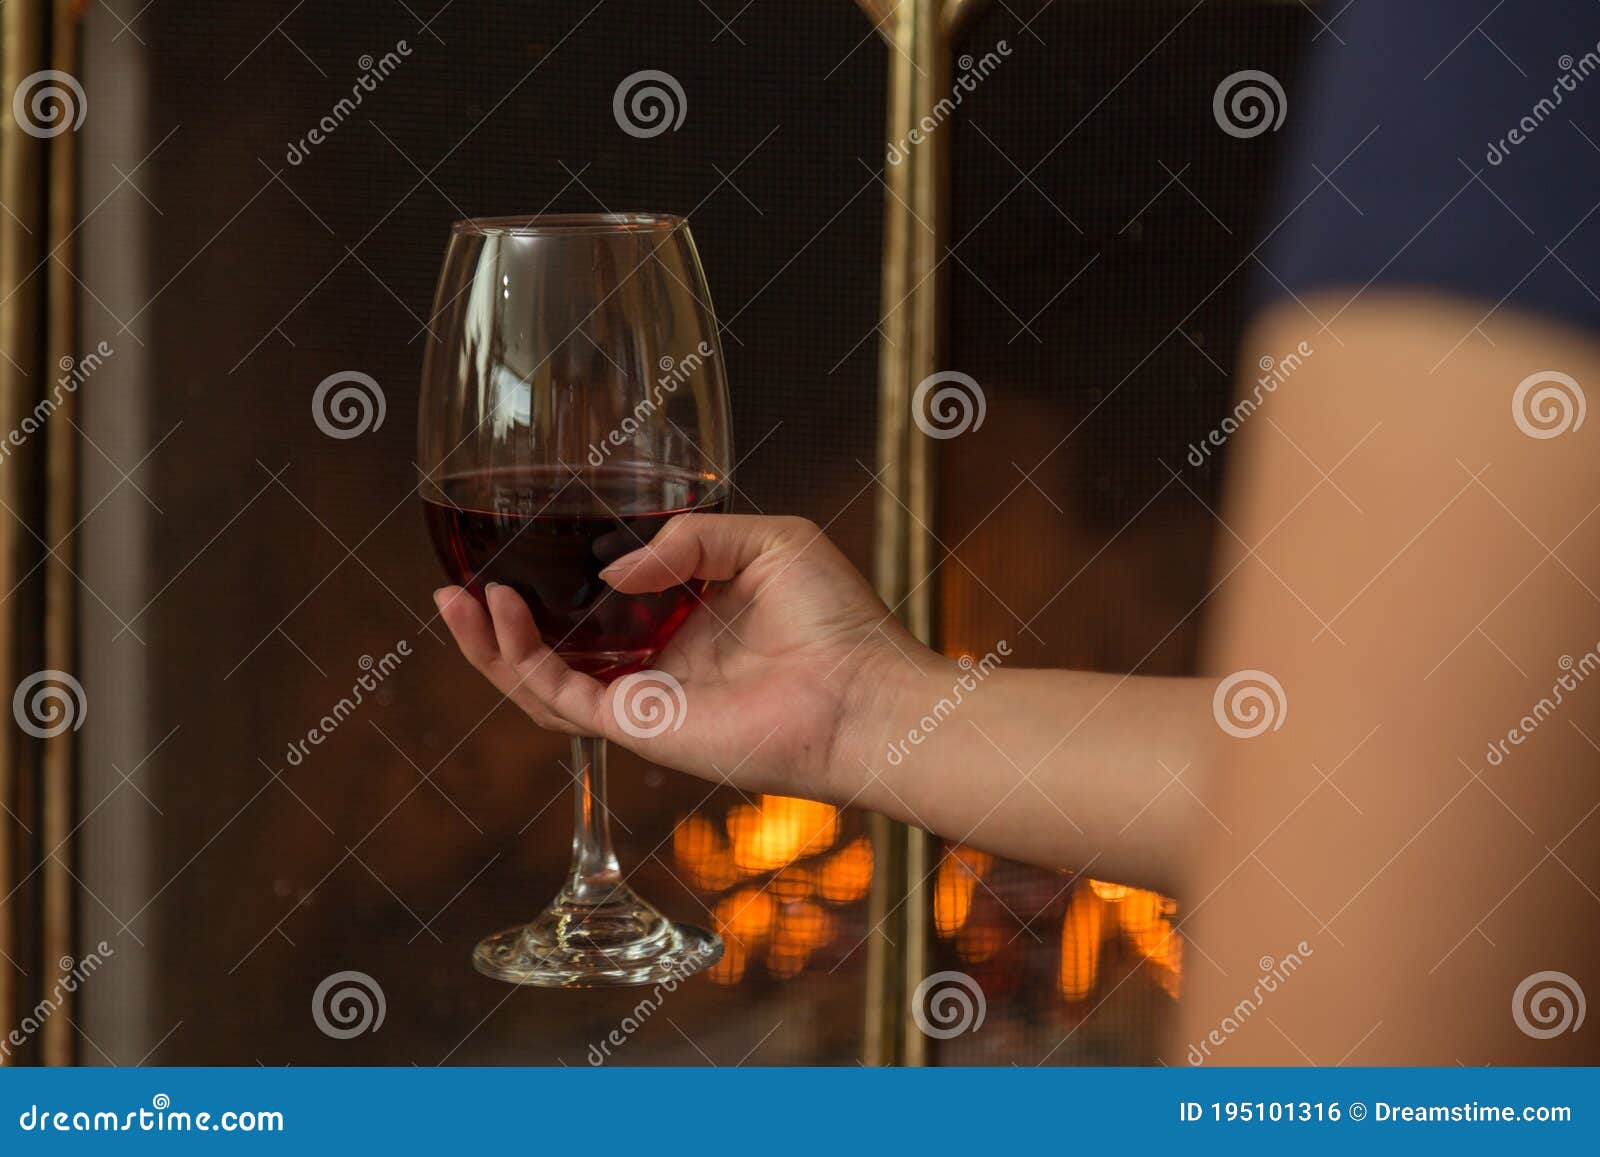 https://thumbs.dreamstime.com/z/hand-holding-large-wine-glass-fireplace-hand-holding-large-wine-glass-as-background-burning-fireplace-part-arm-195101316.jpg